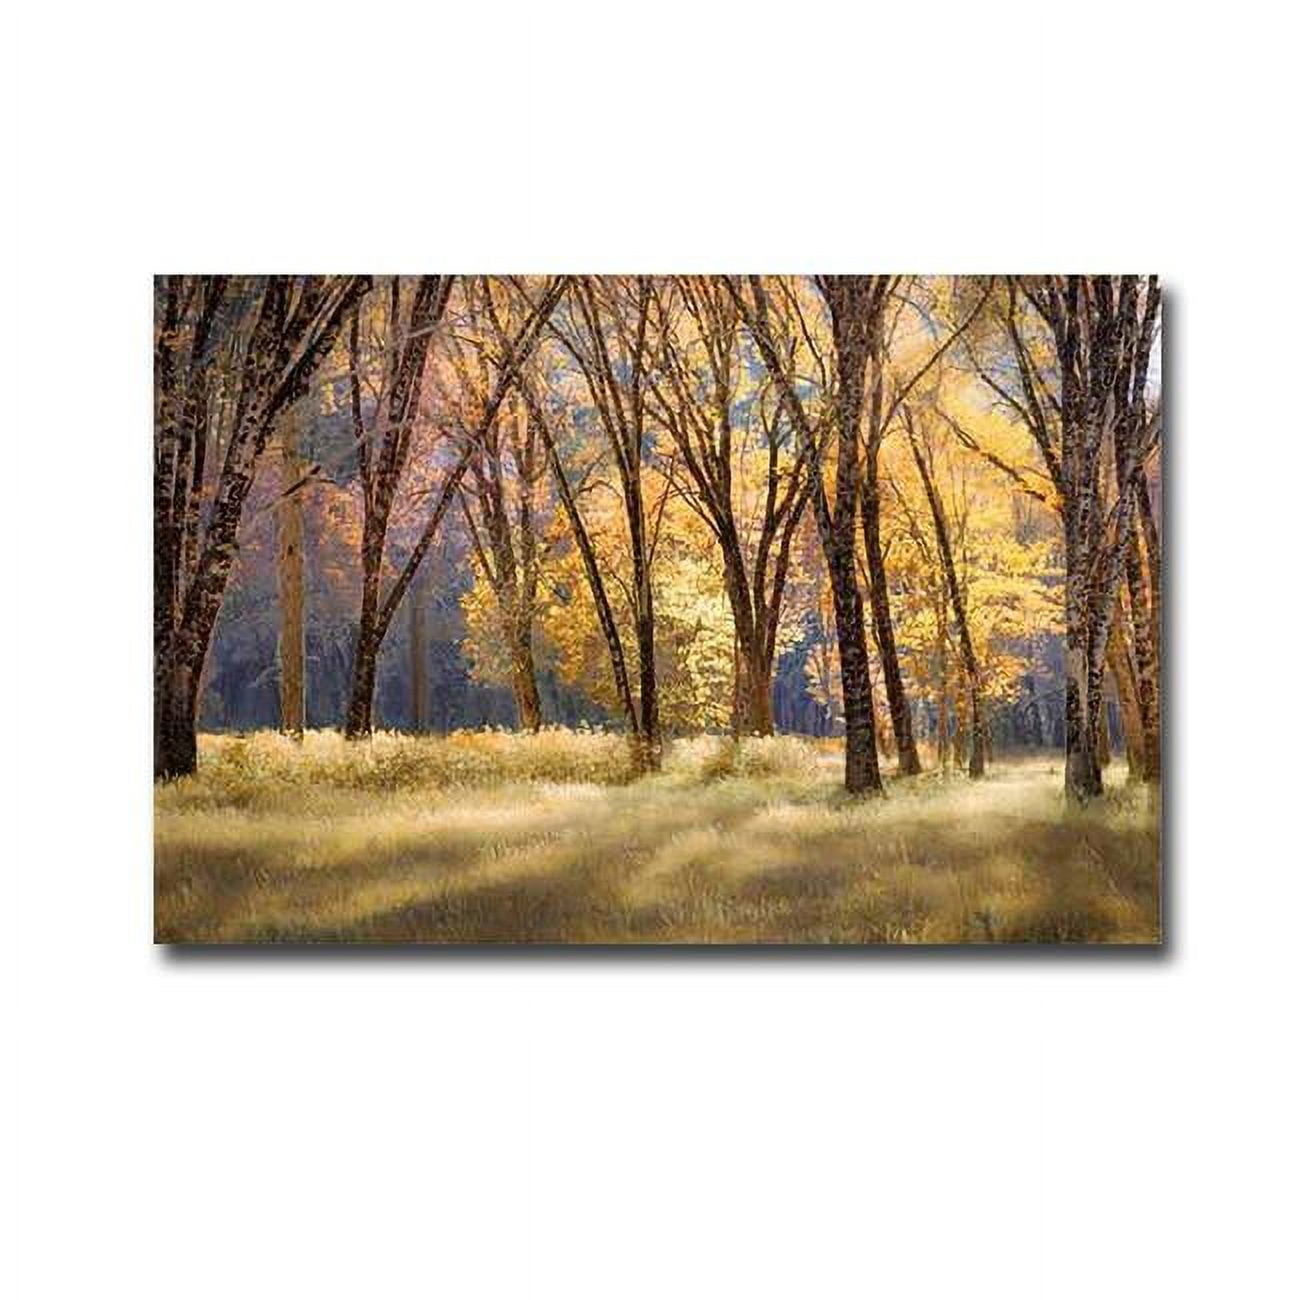 1218o448eg El Capitan Meadow By Fred Mertz Premium Gallery-wrapped Canvas Giclee Art - Ready-to-hang, 12 X 18 X 1.5 In.